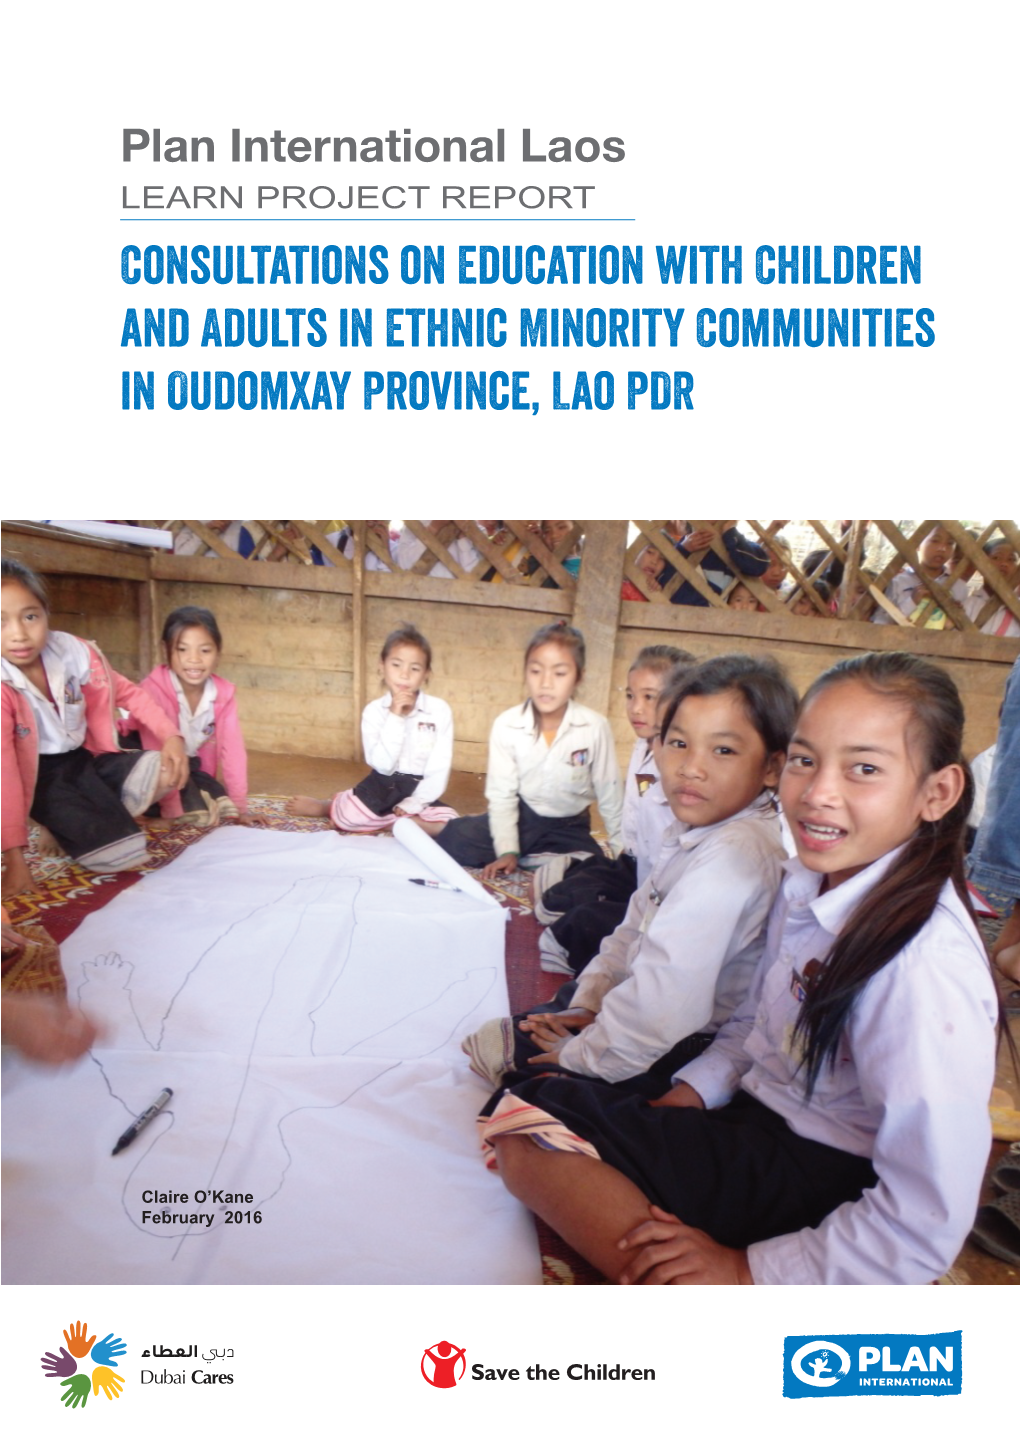 Consultations on Education with Children and Adults in Ethnic Minority Communities in Oudomxay Province, Lao PDR